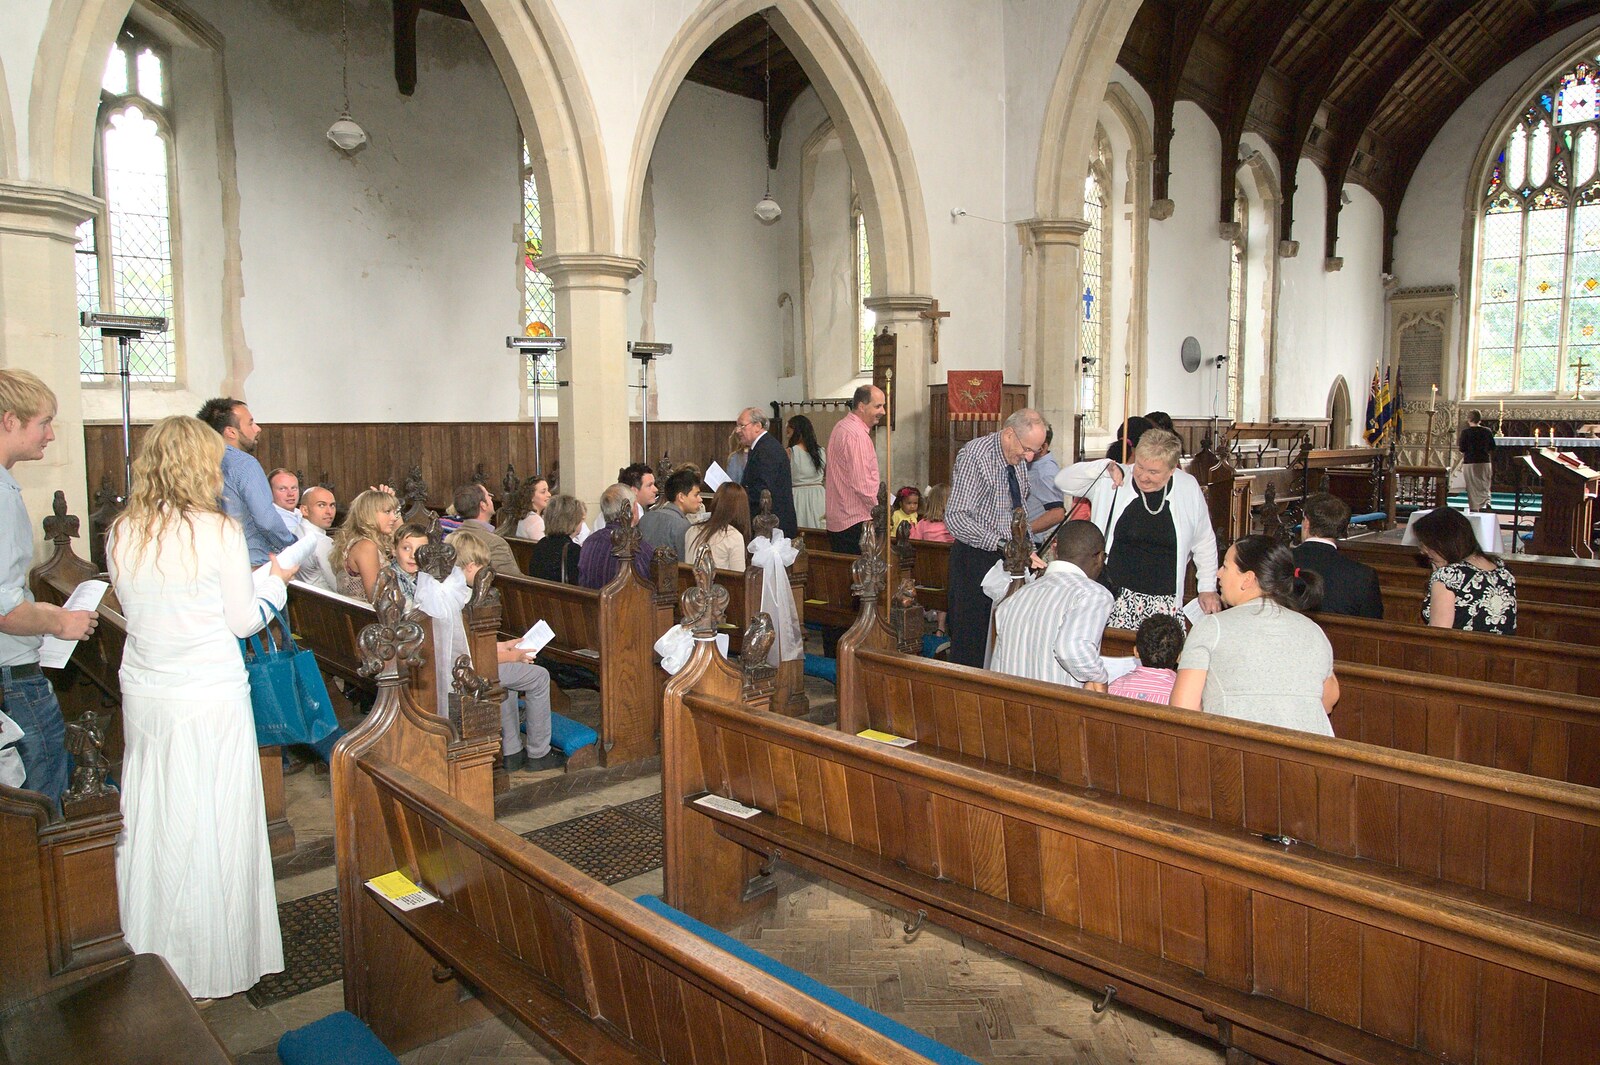 The church fills up from A Christening at St. Mary's Church, Wortham, Suffolk - 12th June 2011